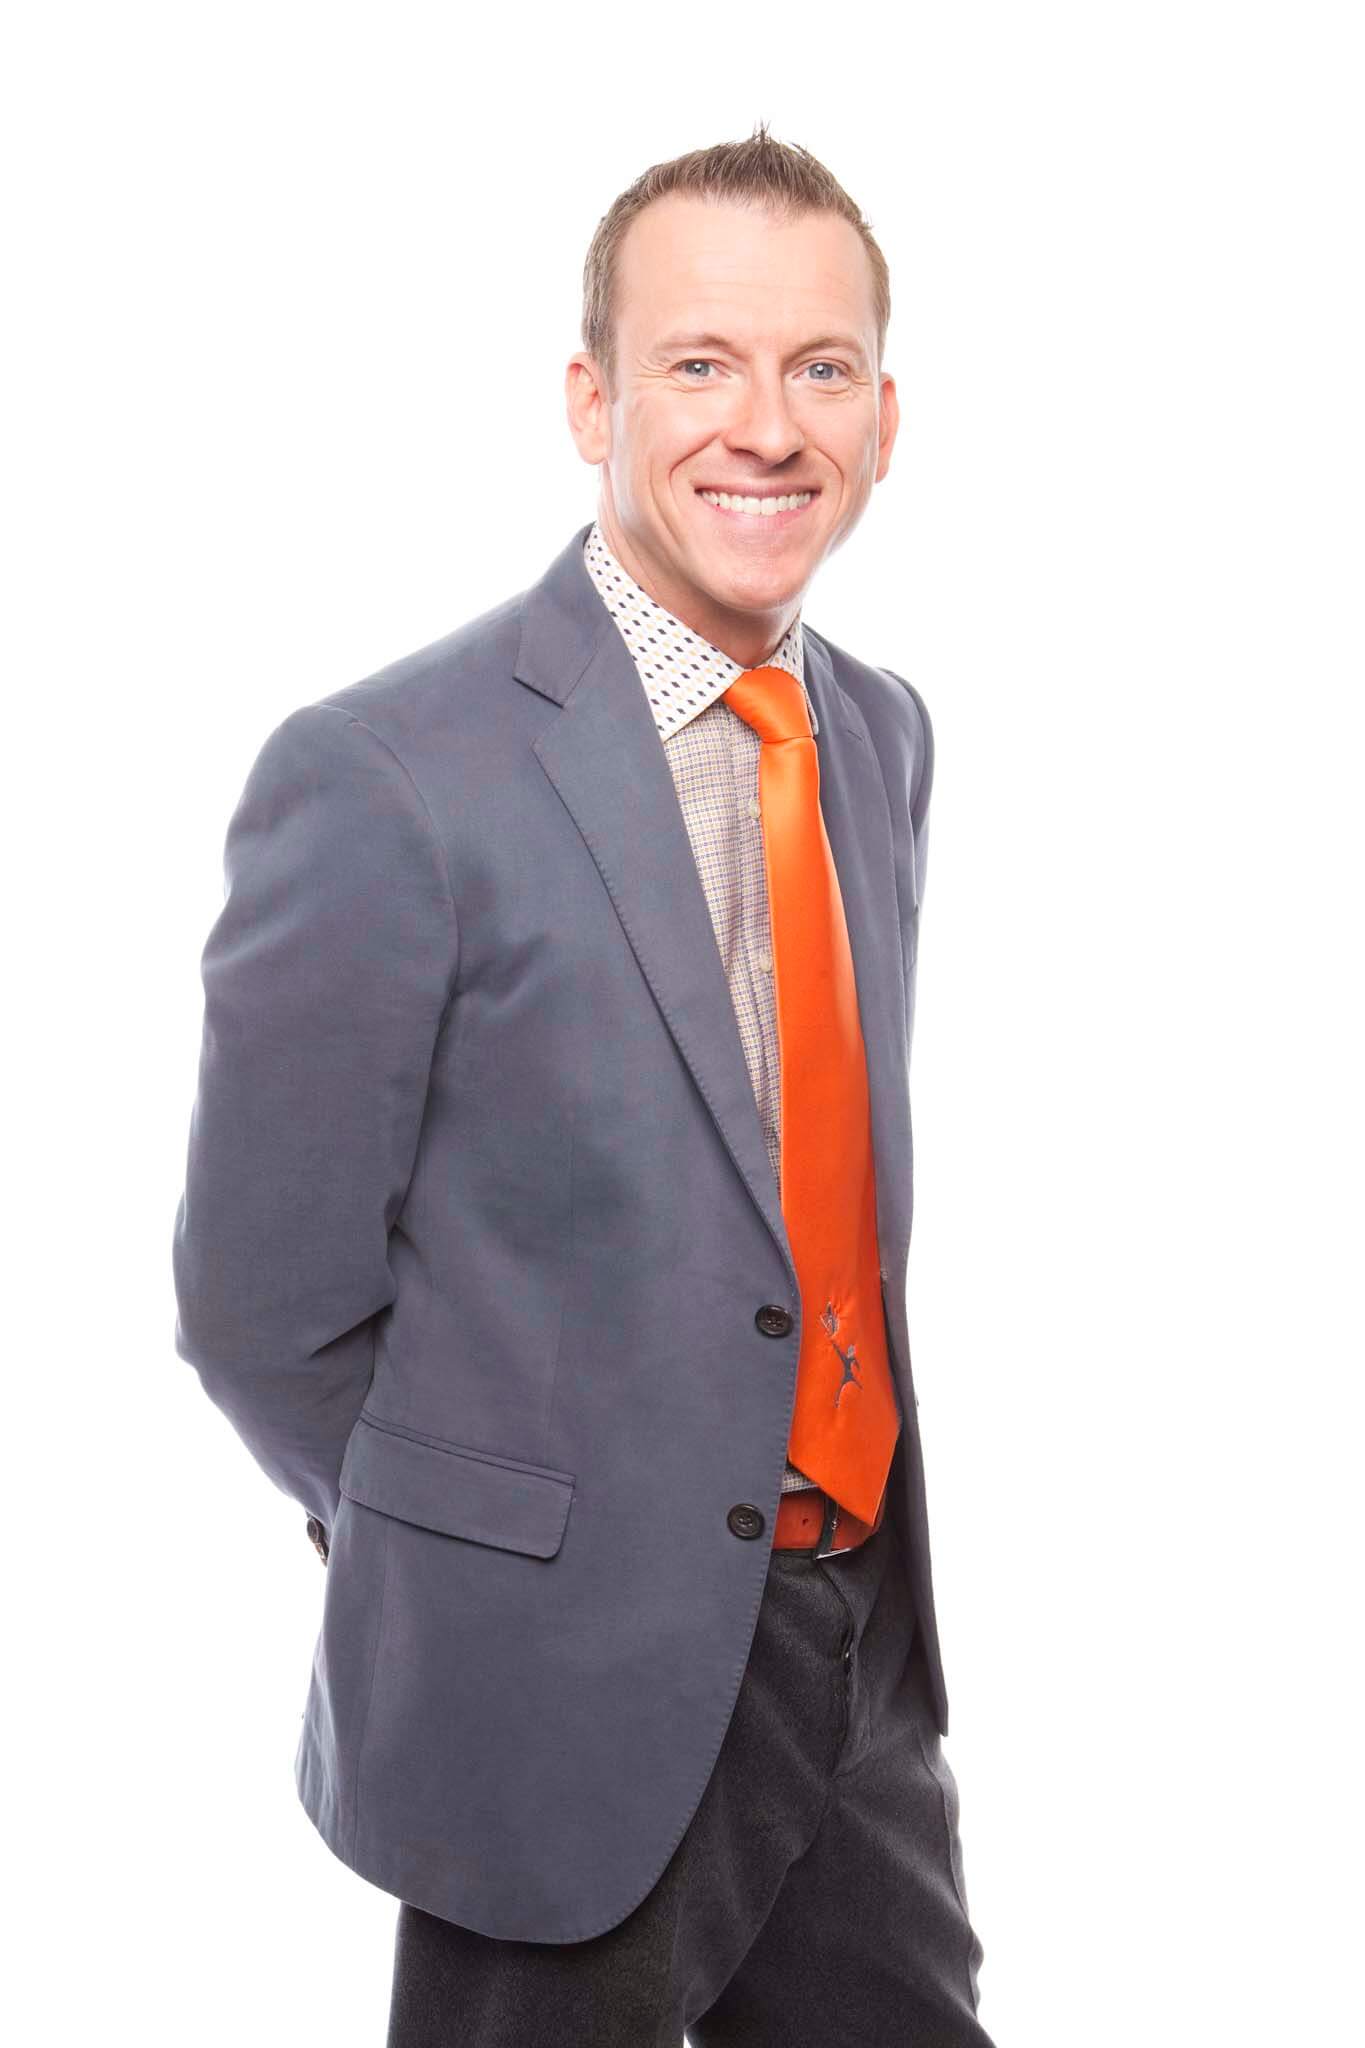 Ron Clark Innovative Speaker, Educator and Best-Selling Author The Ron Clark Academy